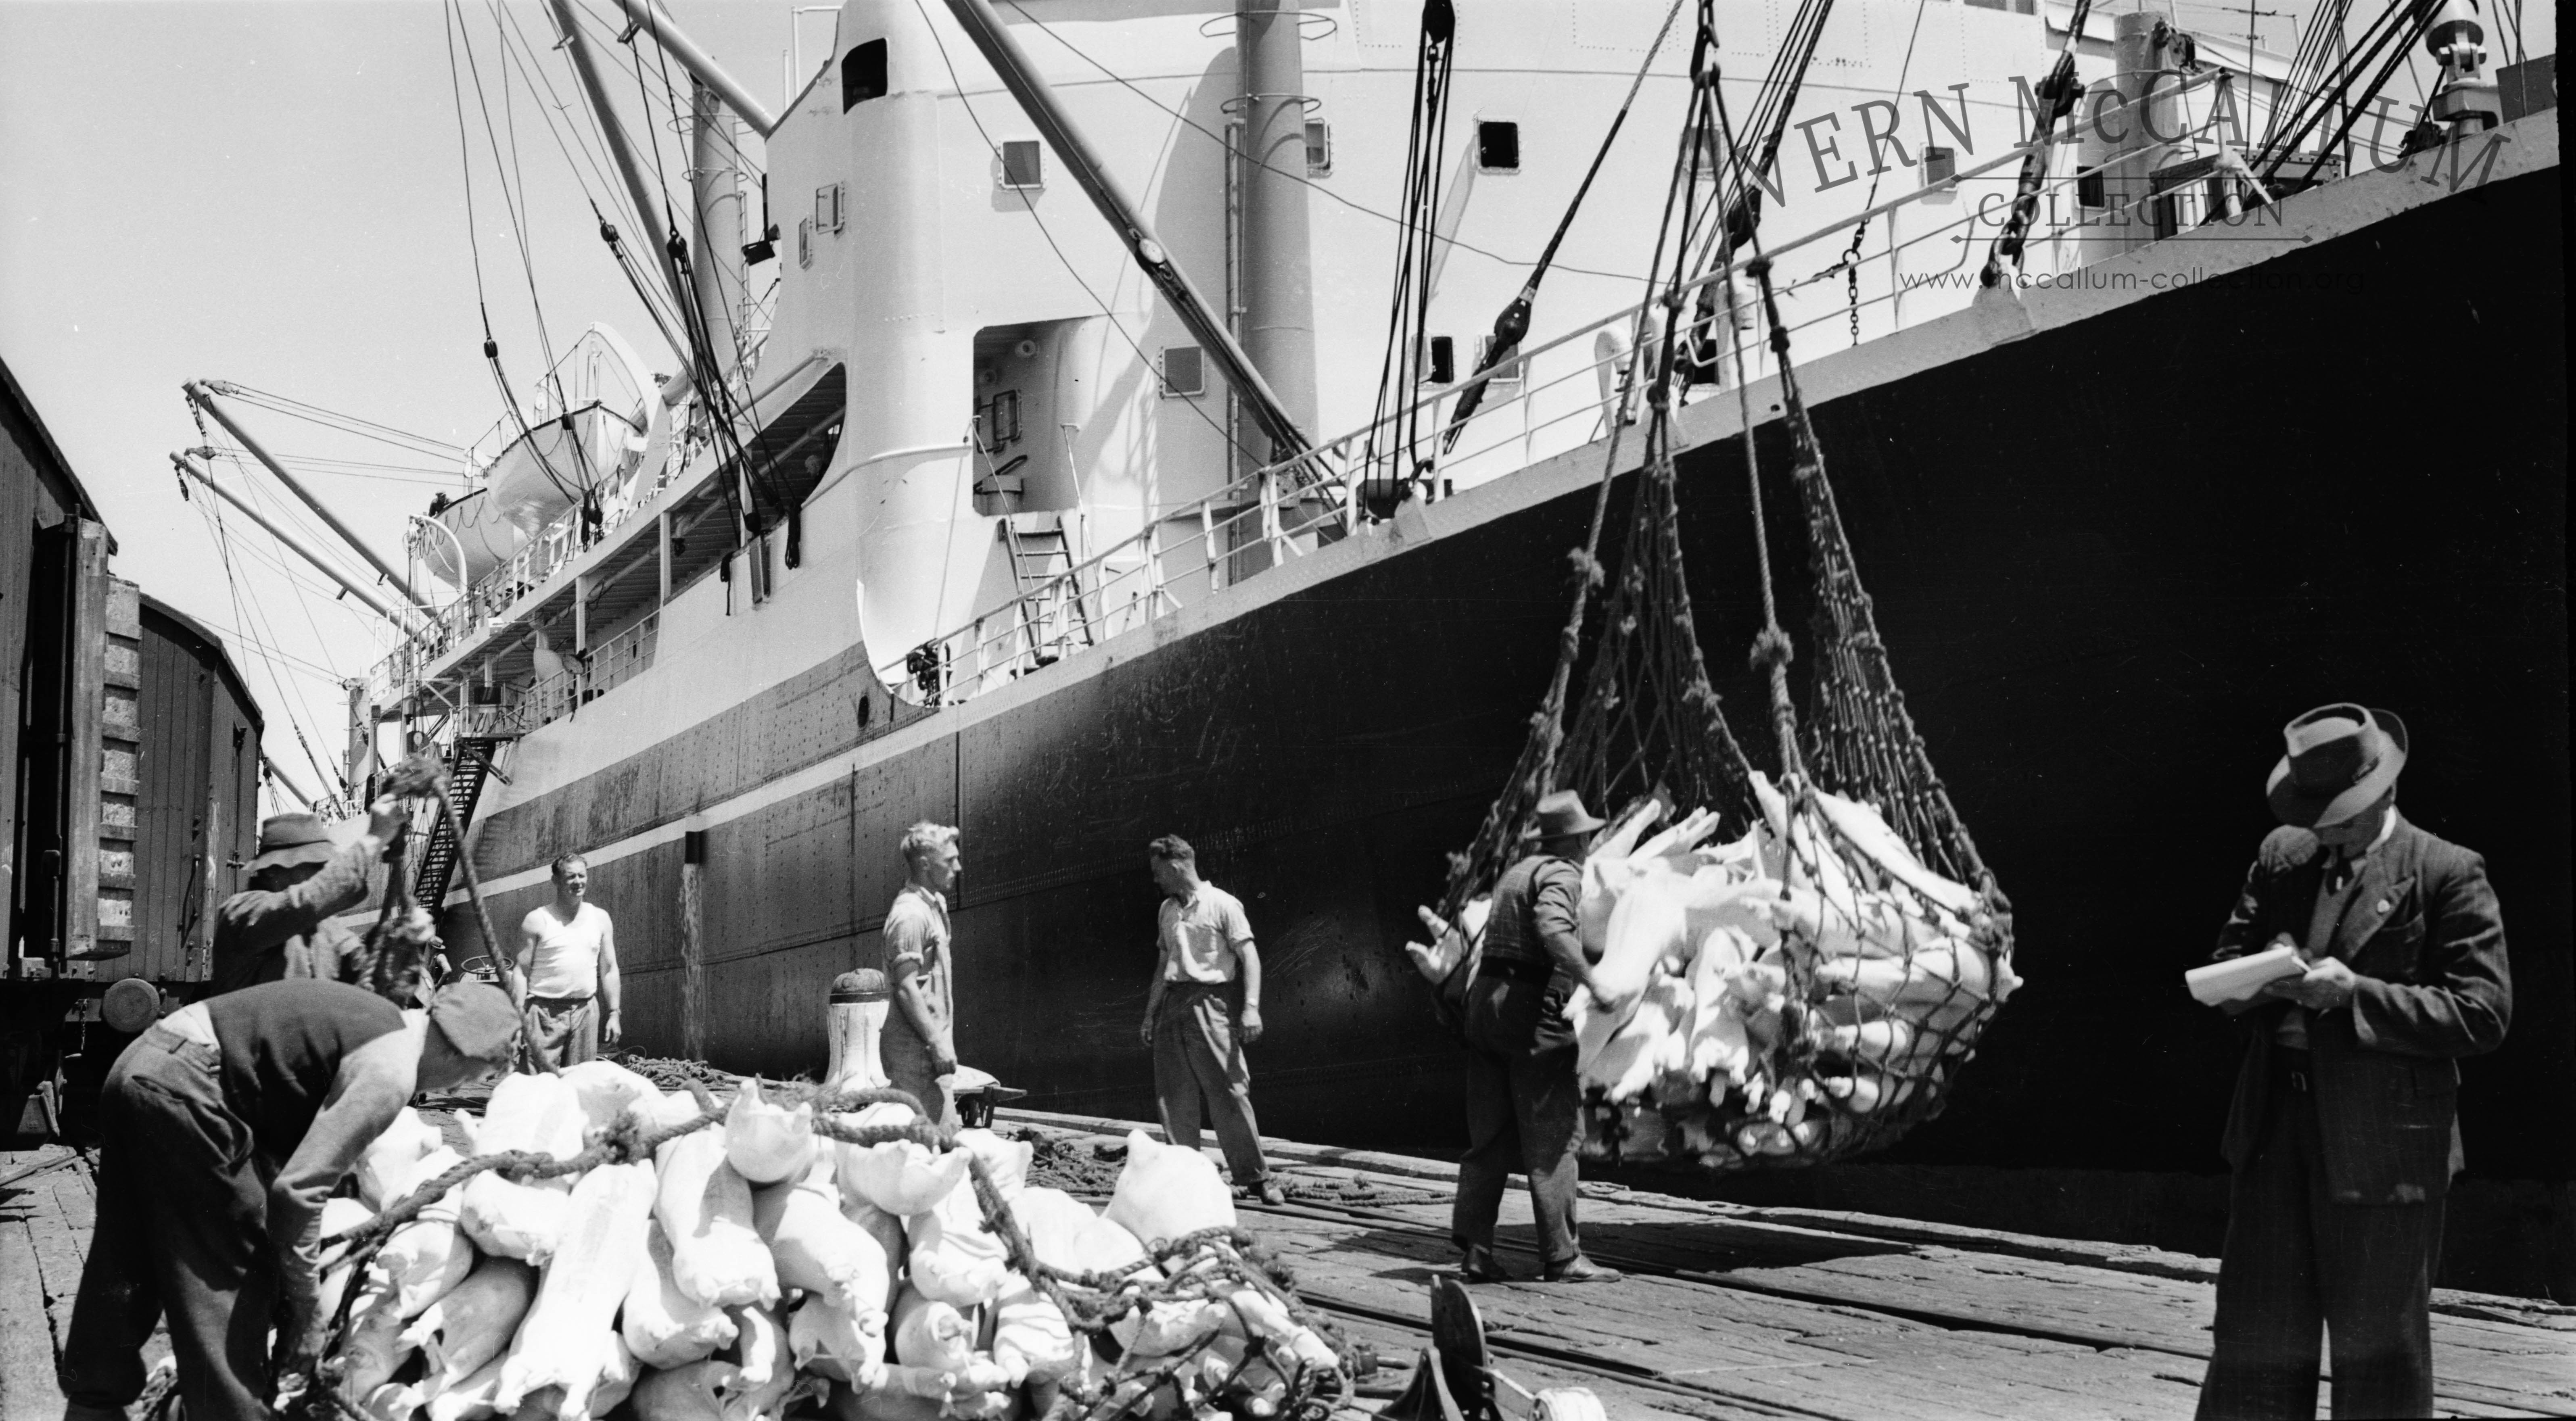 Exporting frozen mutton at the port.